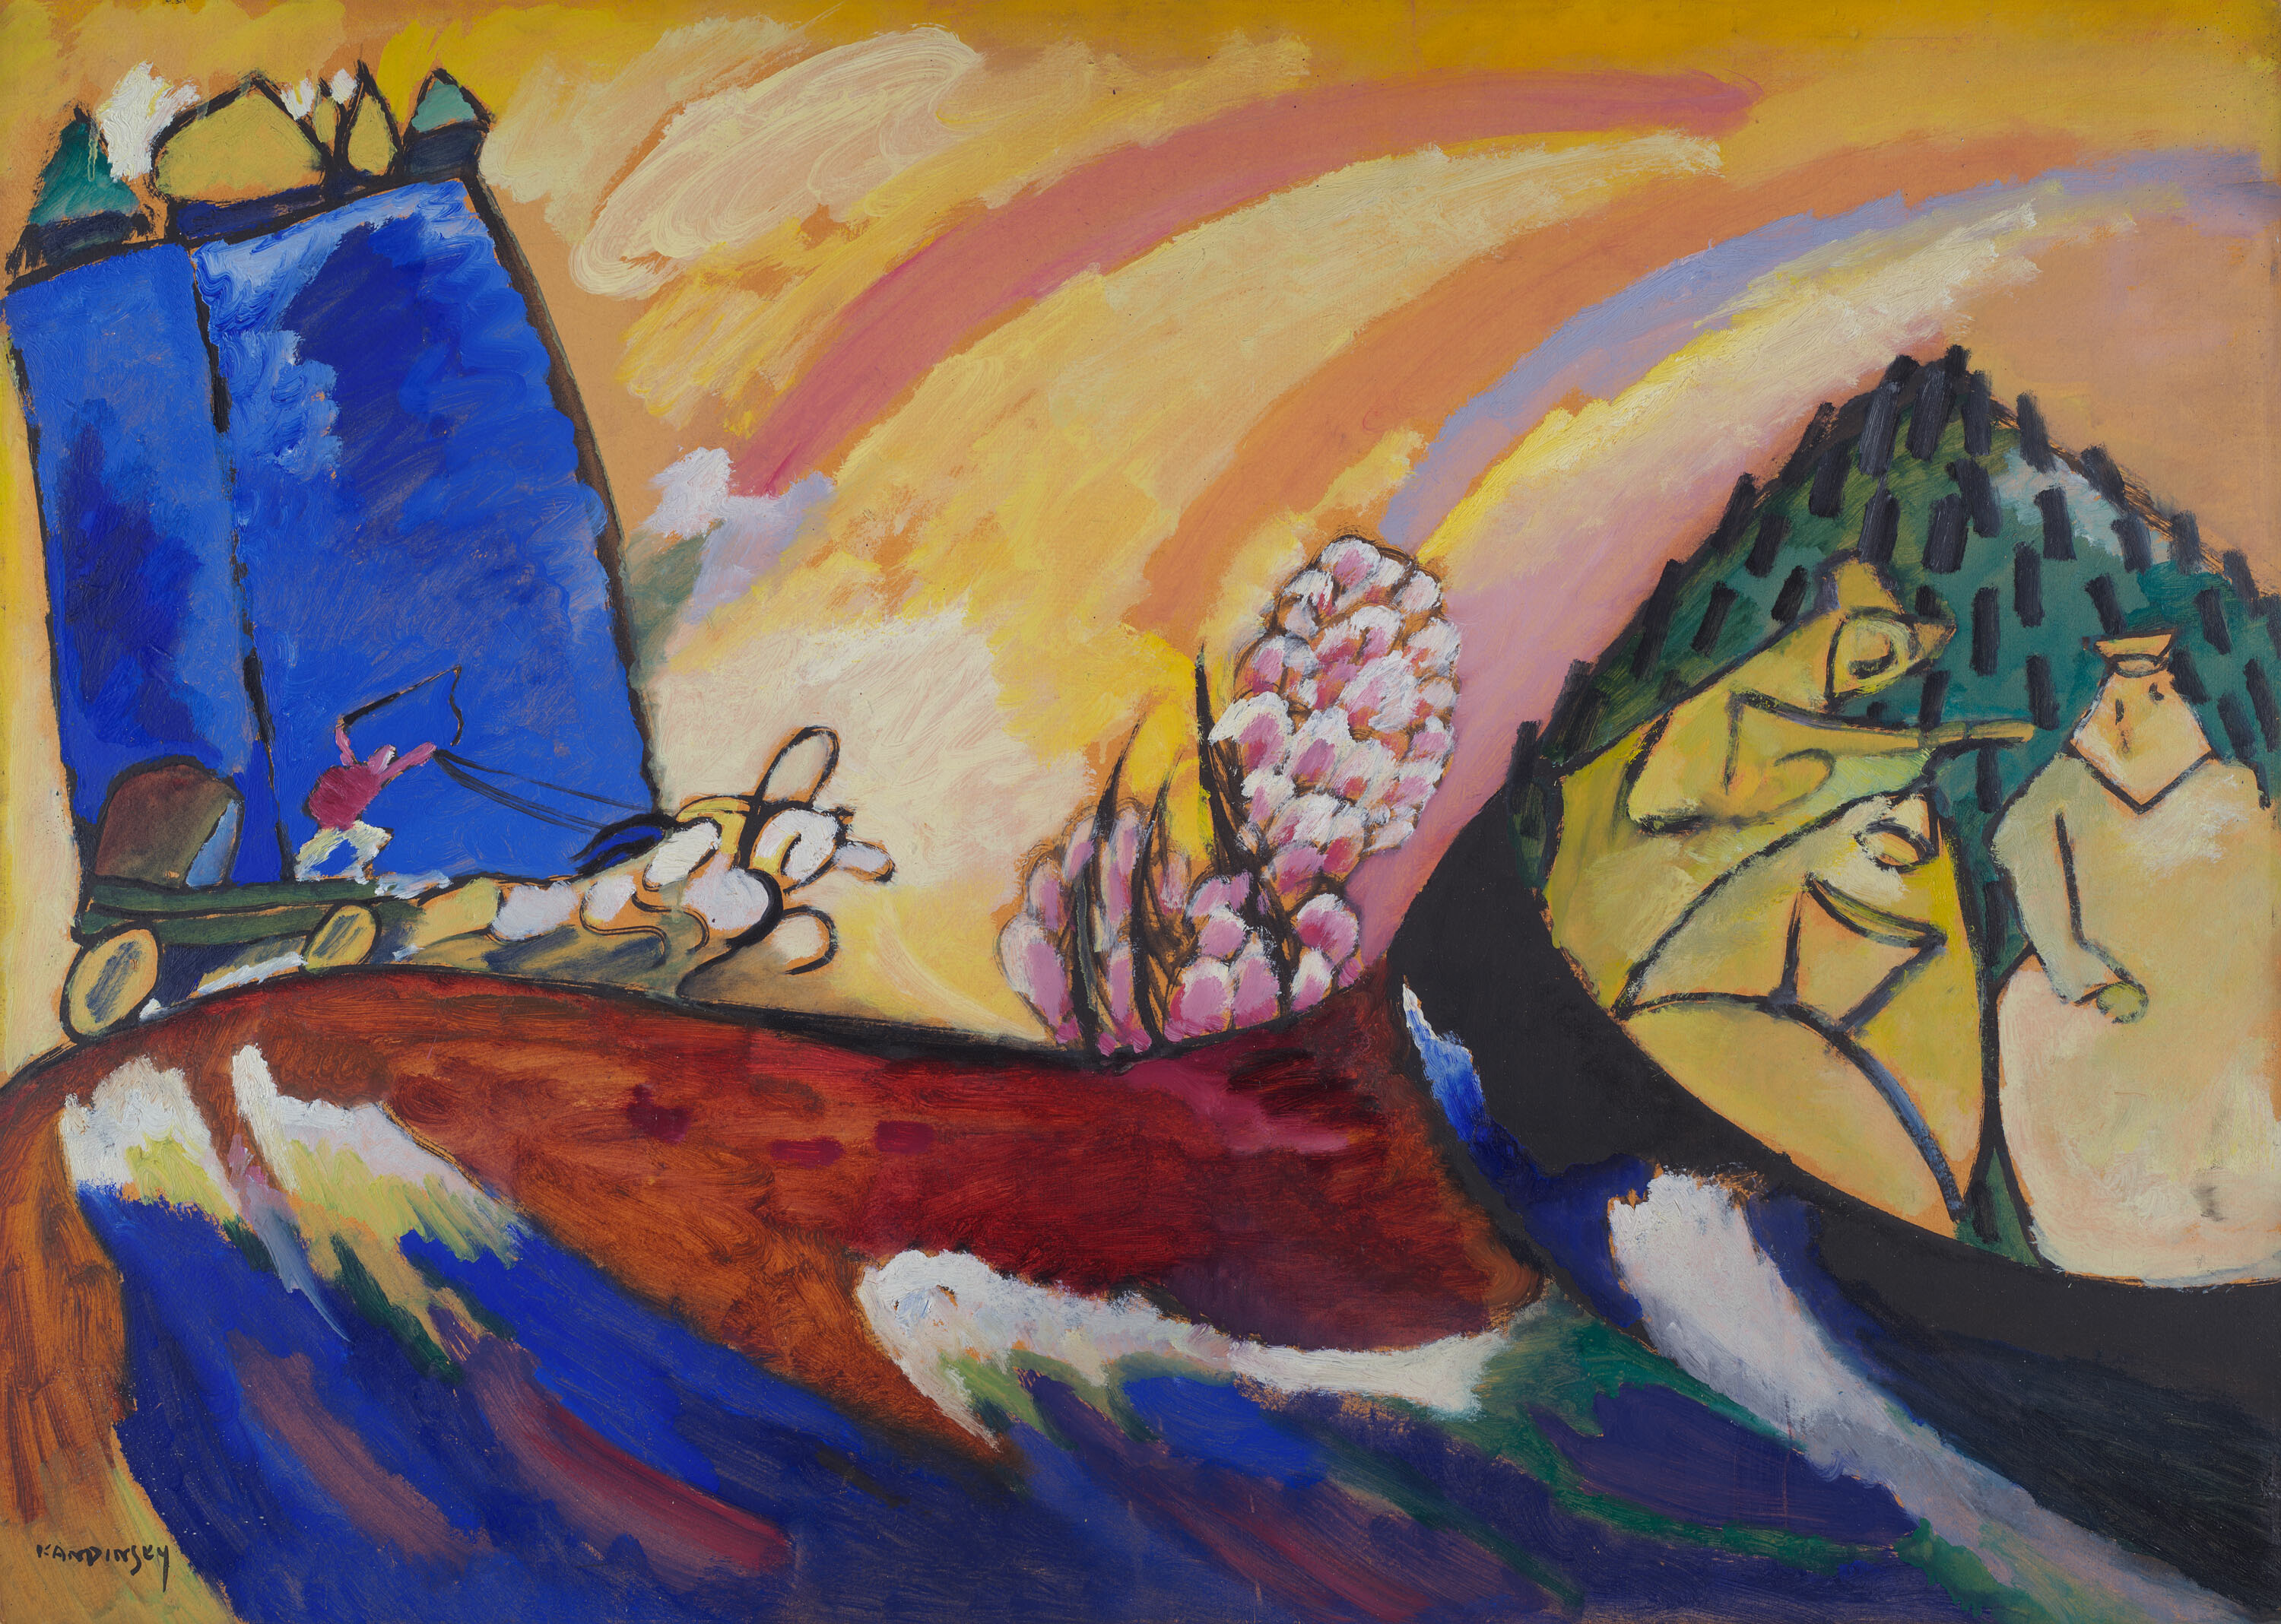 Painting with Troika by Wassily Kandinsky - 1911 - 69.7 × 97.3 cm Art Institute of Chicago